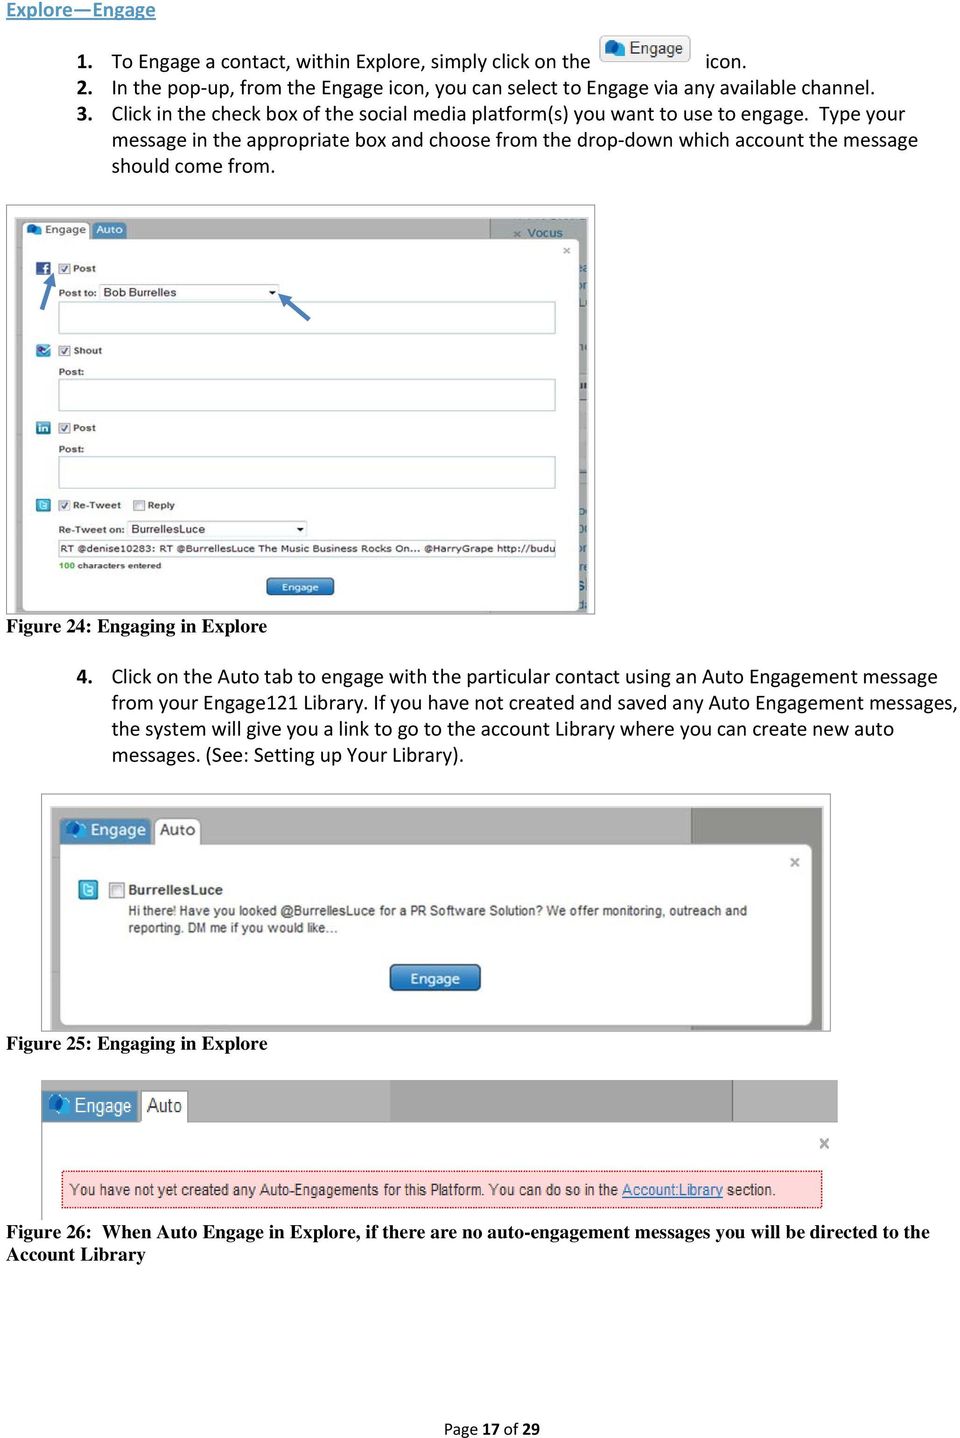 Figure 24: Engaging in Explore 4. Click on the Auto tab to engage with the particular contact using an Auto Engagement message from your Engage121 Library.